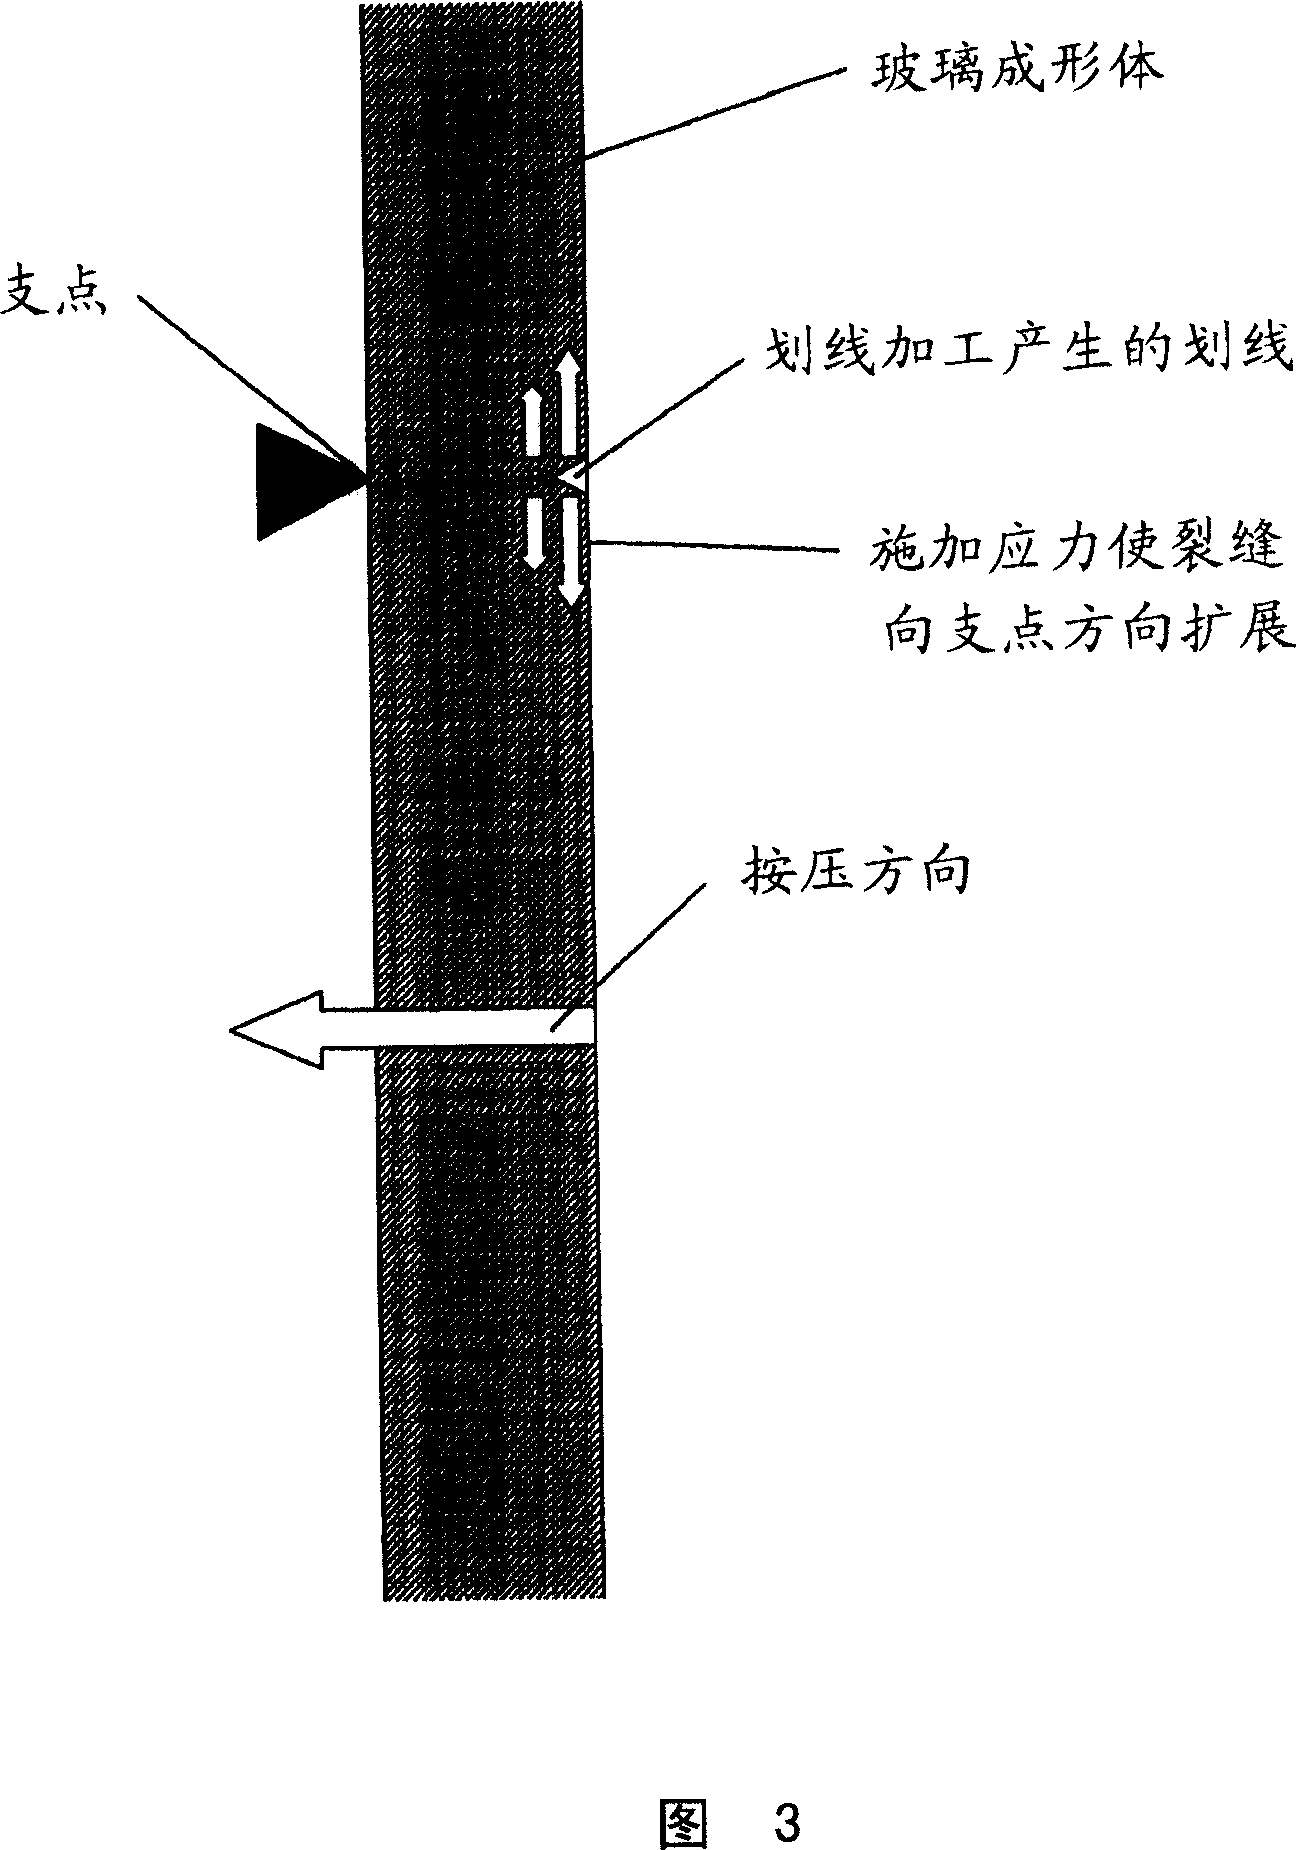 Optical glass, glass cup for die pressing forming, glass forming body, optical element and manufacture method thereof